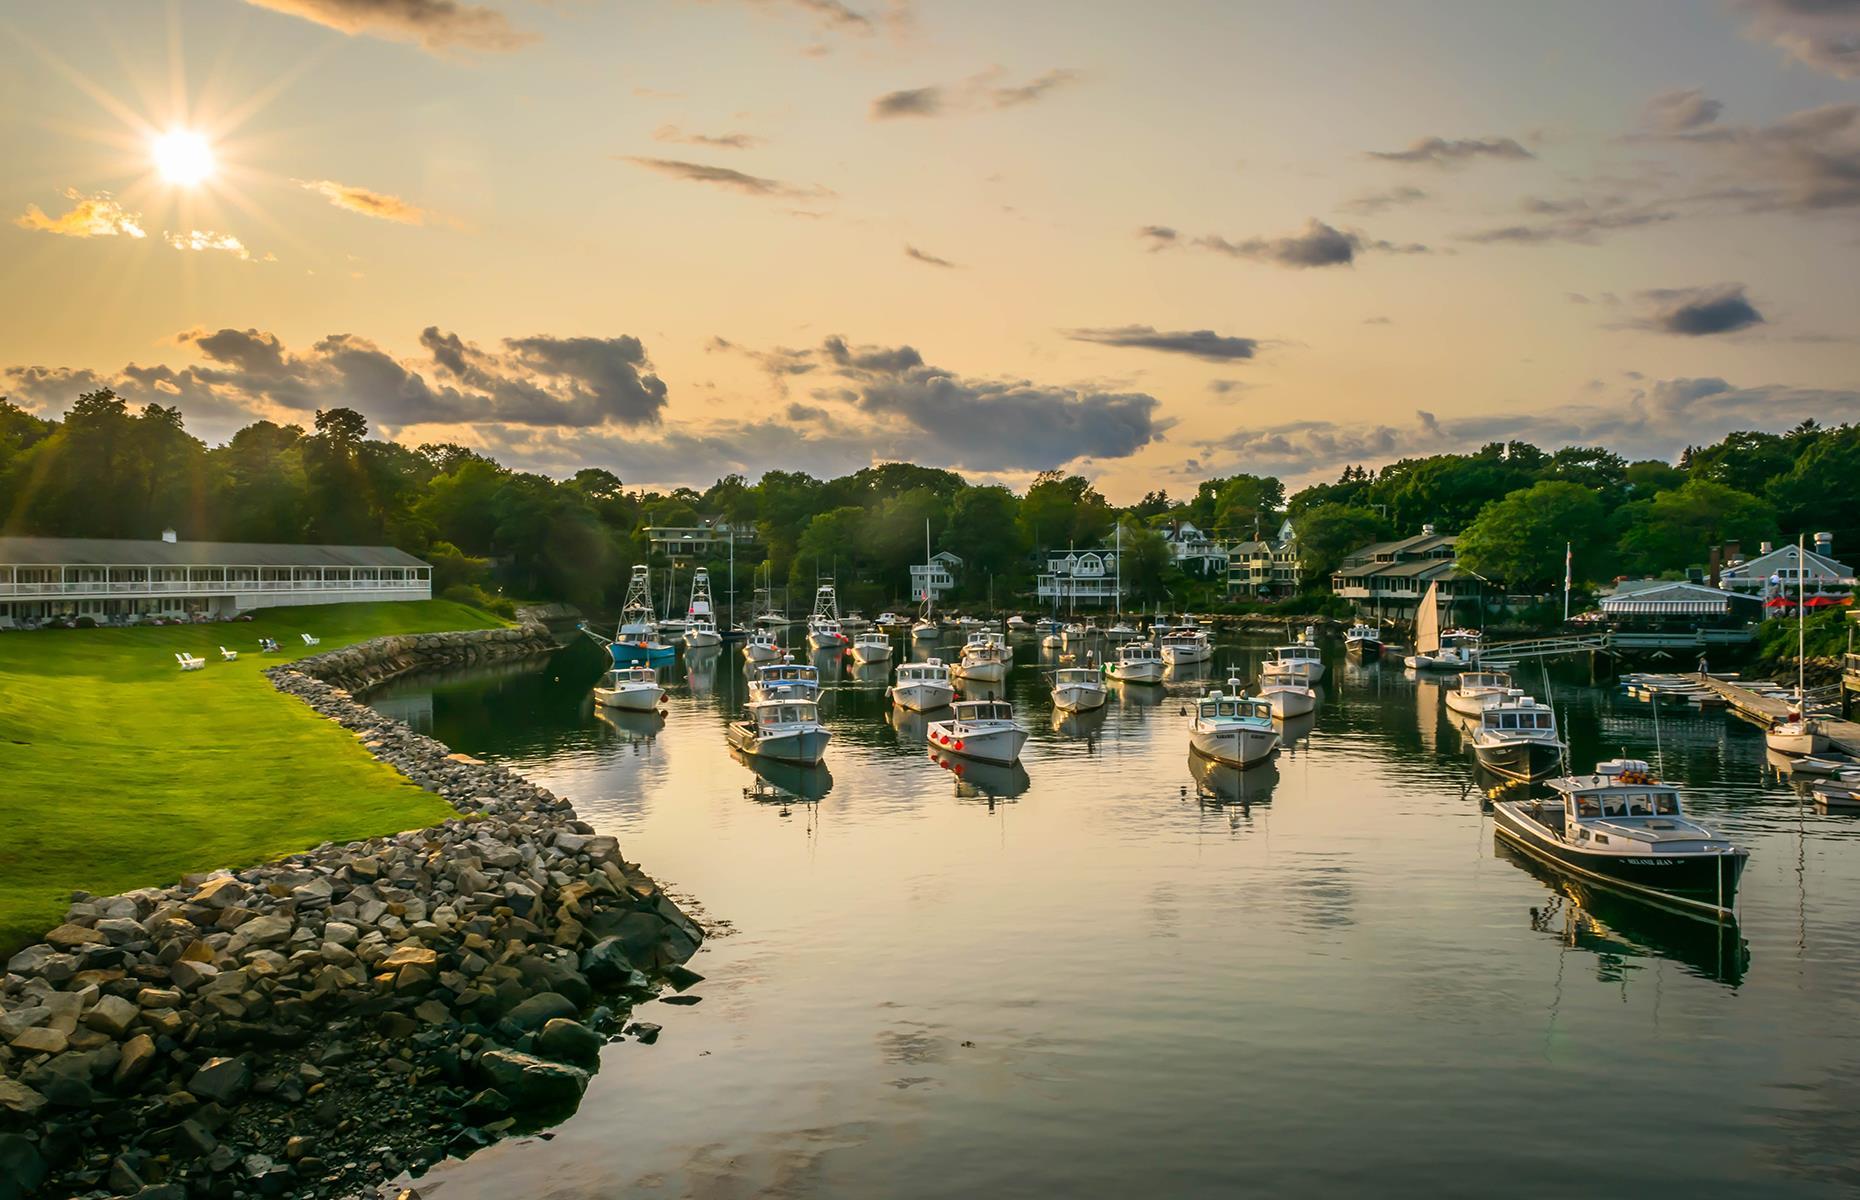 With more than 12,000 miles of coastline, it's no wonder the US has so many incredibly picturesque coastal towns. From atmospheric New England fishing villages to laid-back surfer spots in California, America's seaside offers something for everyone. Pack your bags and grab your shades as we take a look at these coastal charmers.